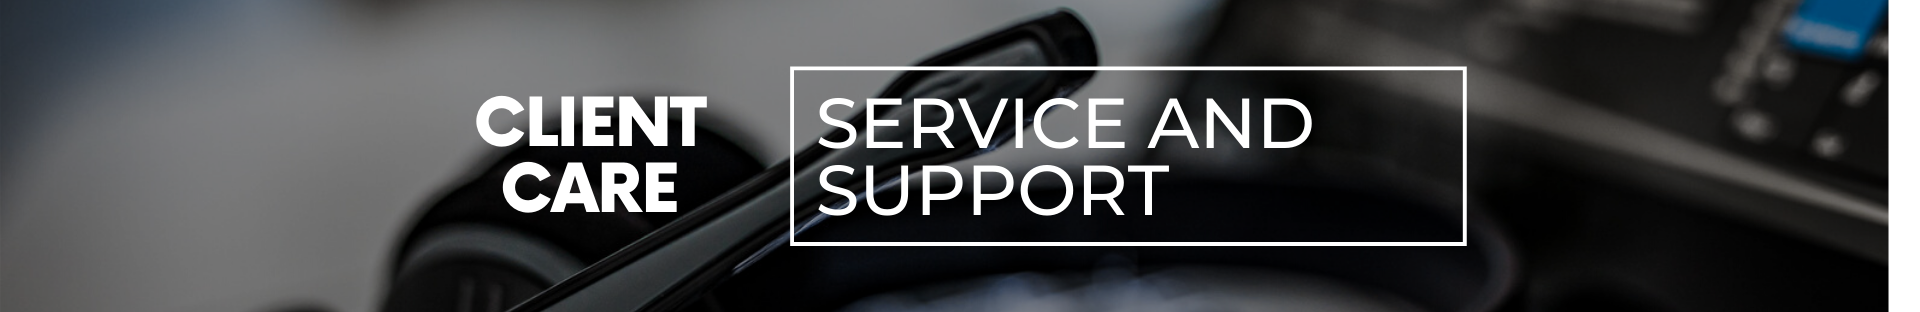 Client Care Service and Support